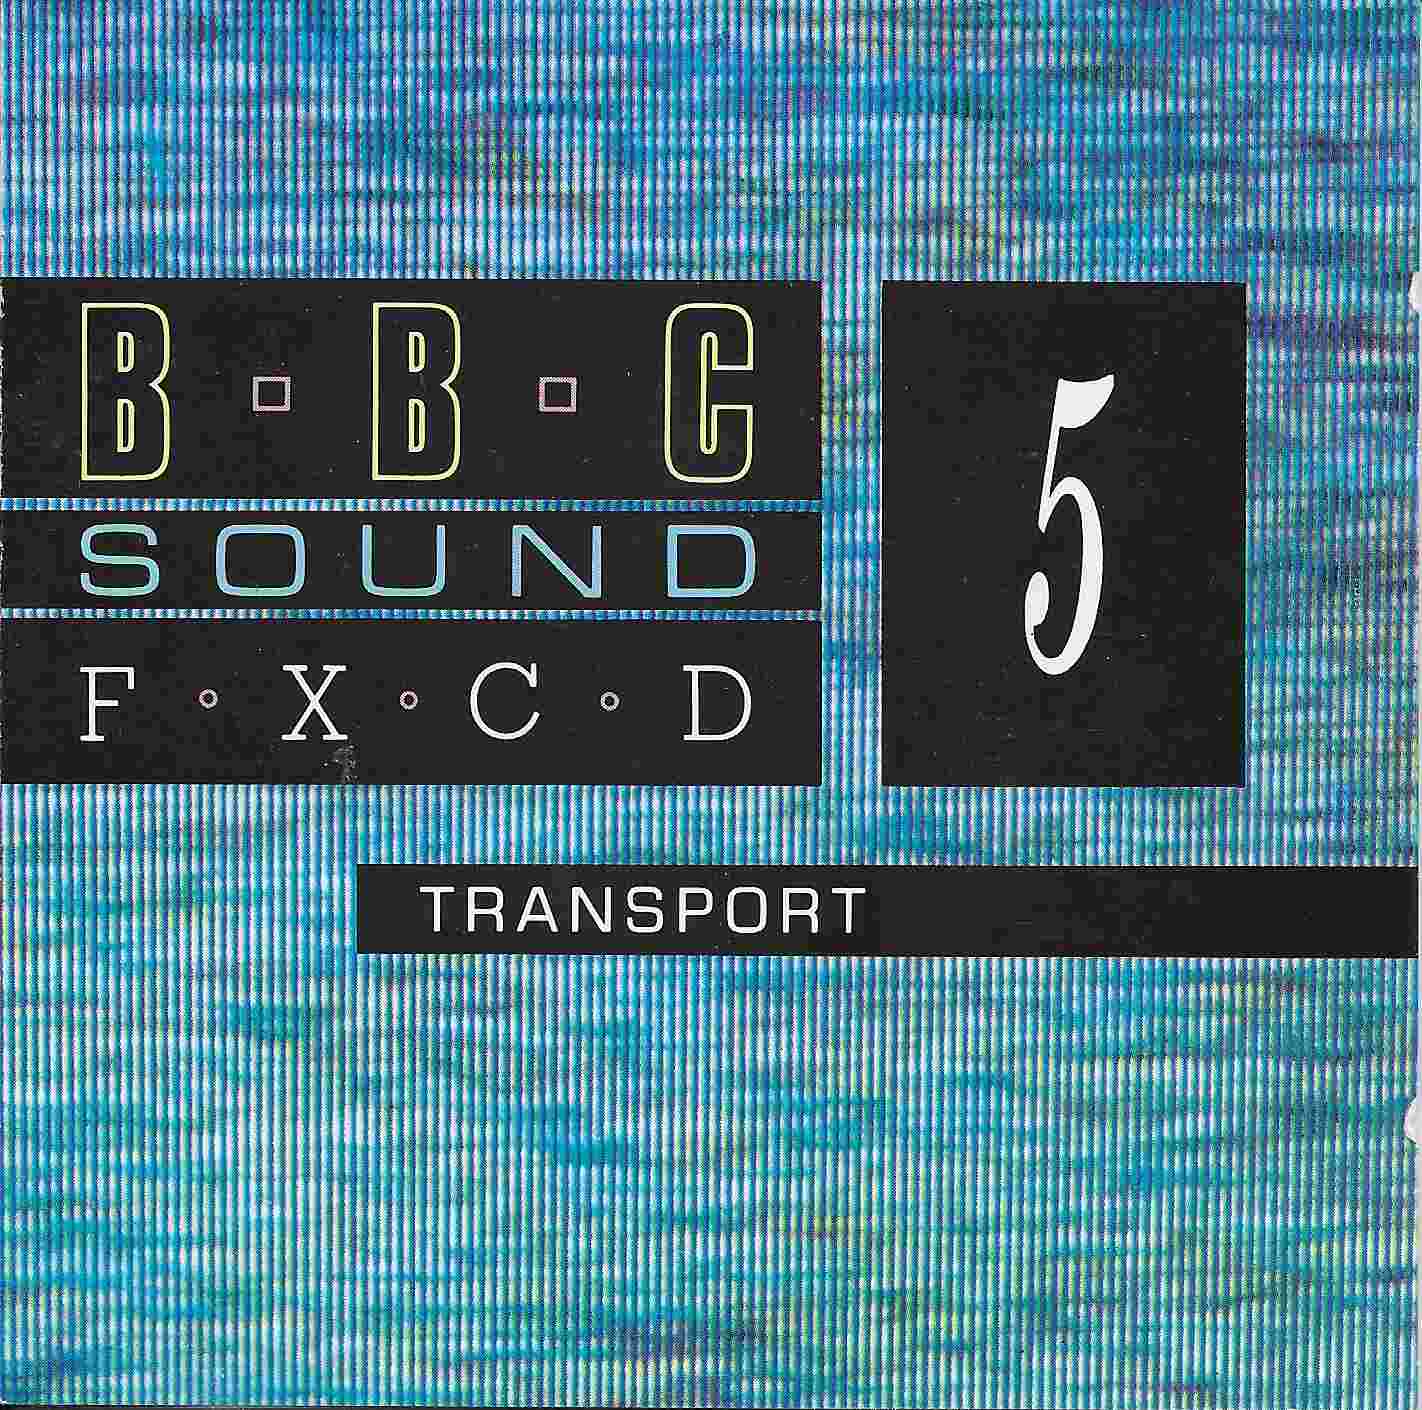 Picture of BBCCD SFX005 Transport by artist Various from the BBC cds - Records and Tapes library